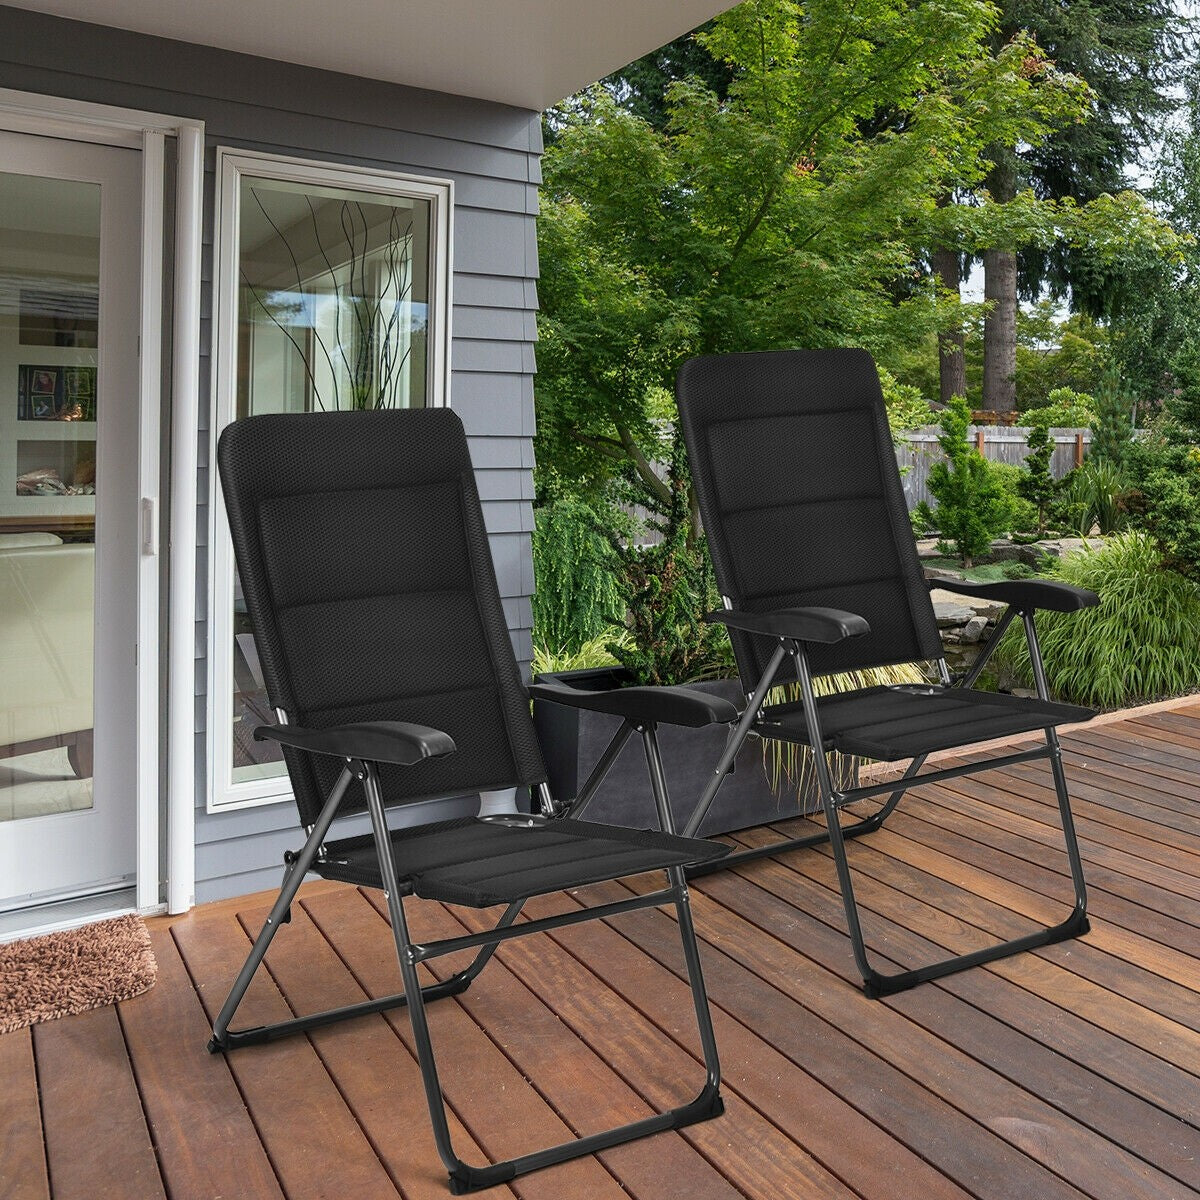 Set of 2 Patio Chairs, Folding Chairs with Adjustable Backrest